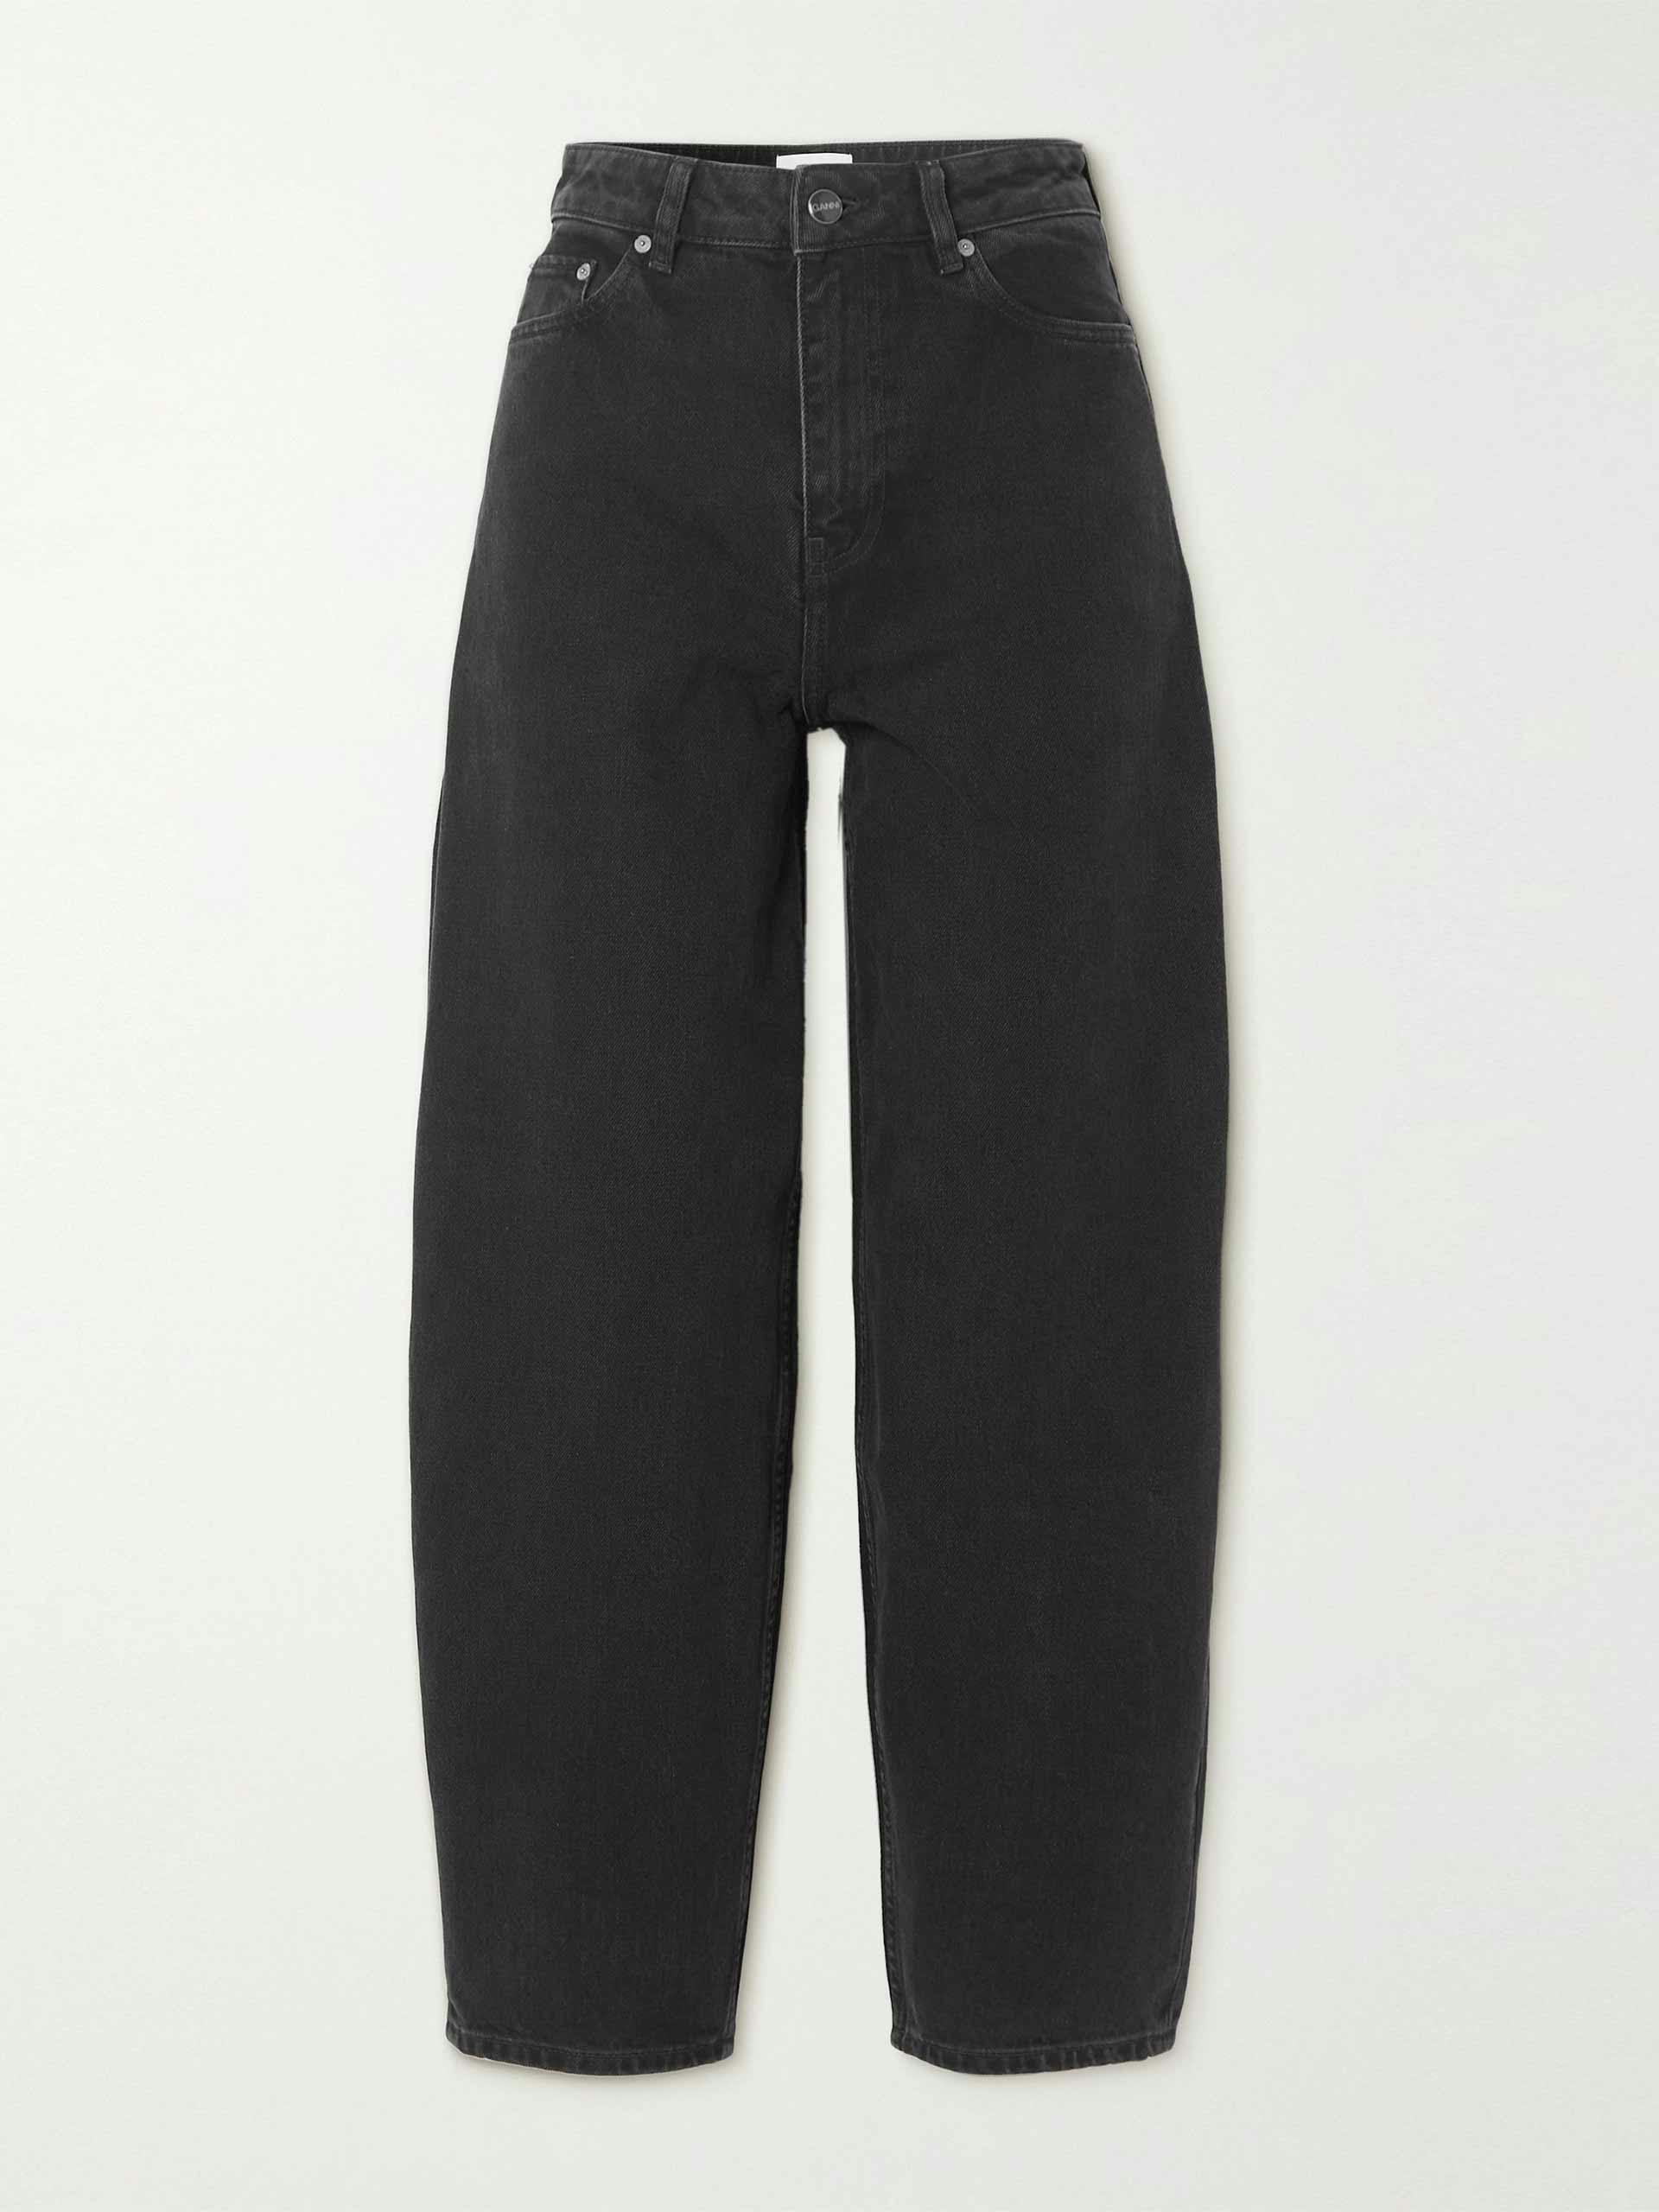 Black cropped high-rise jeans